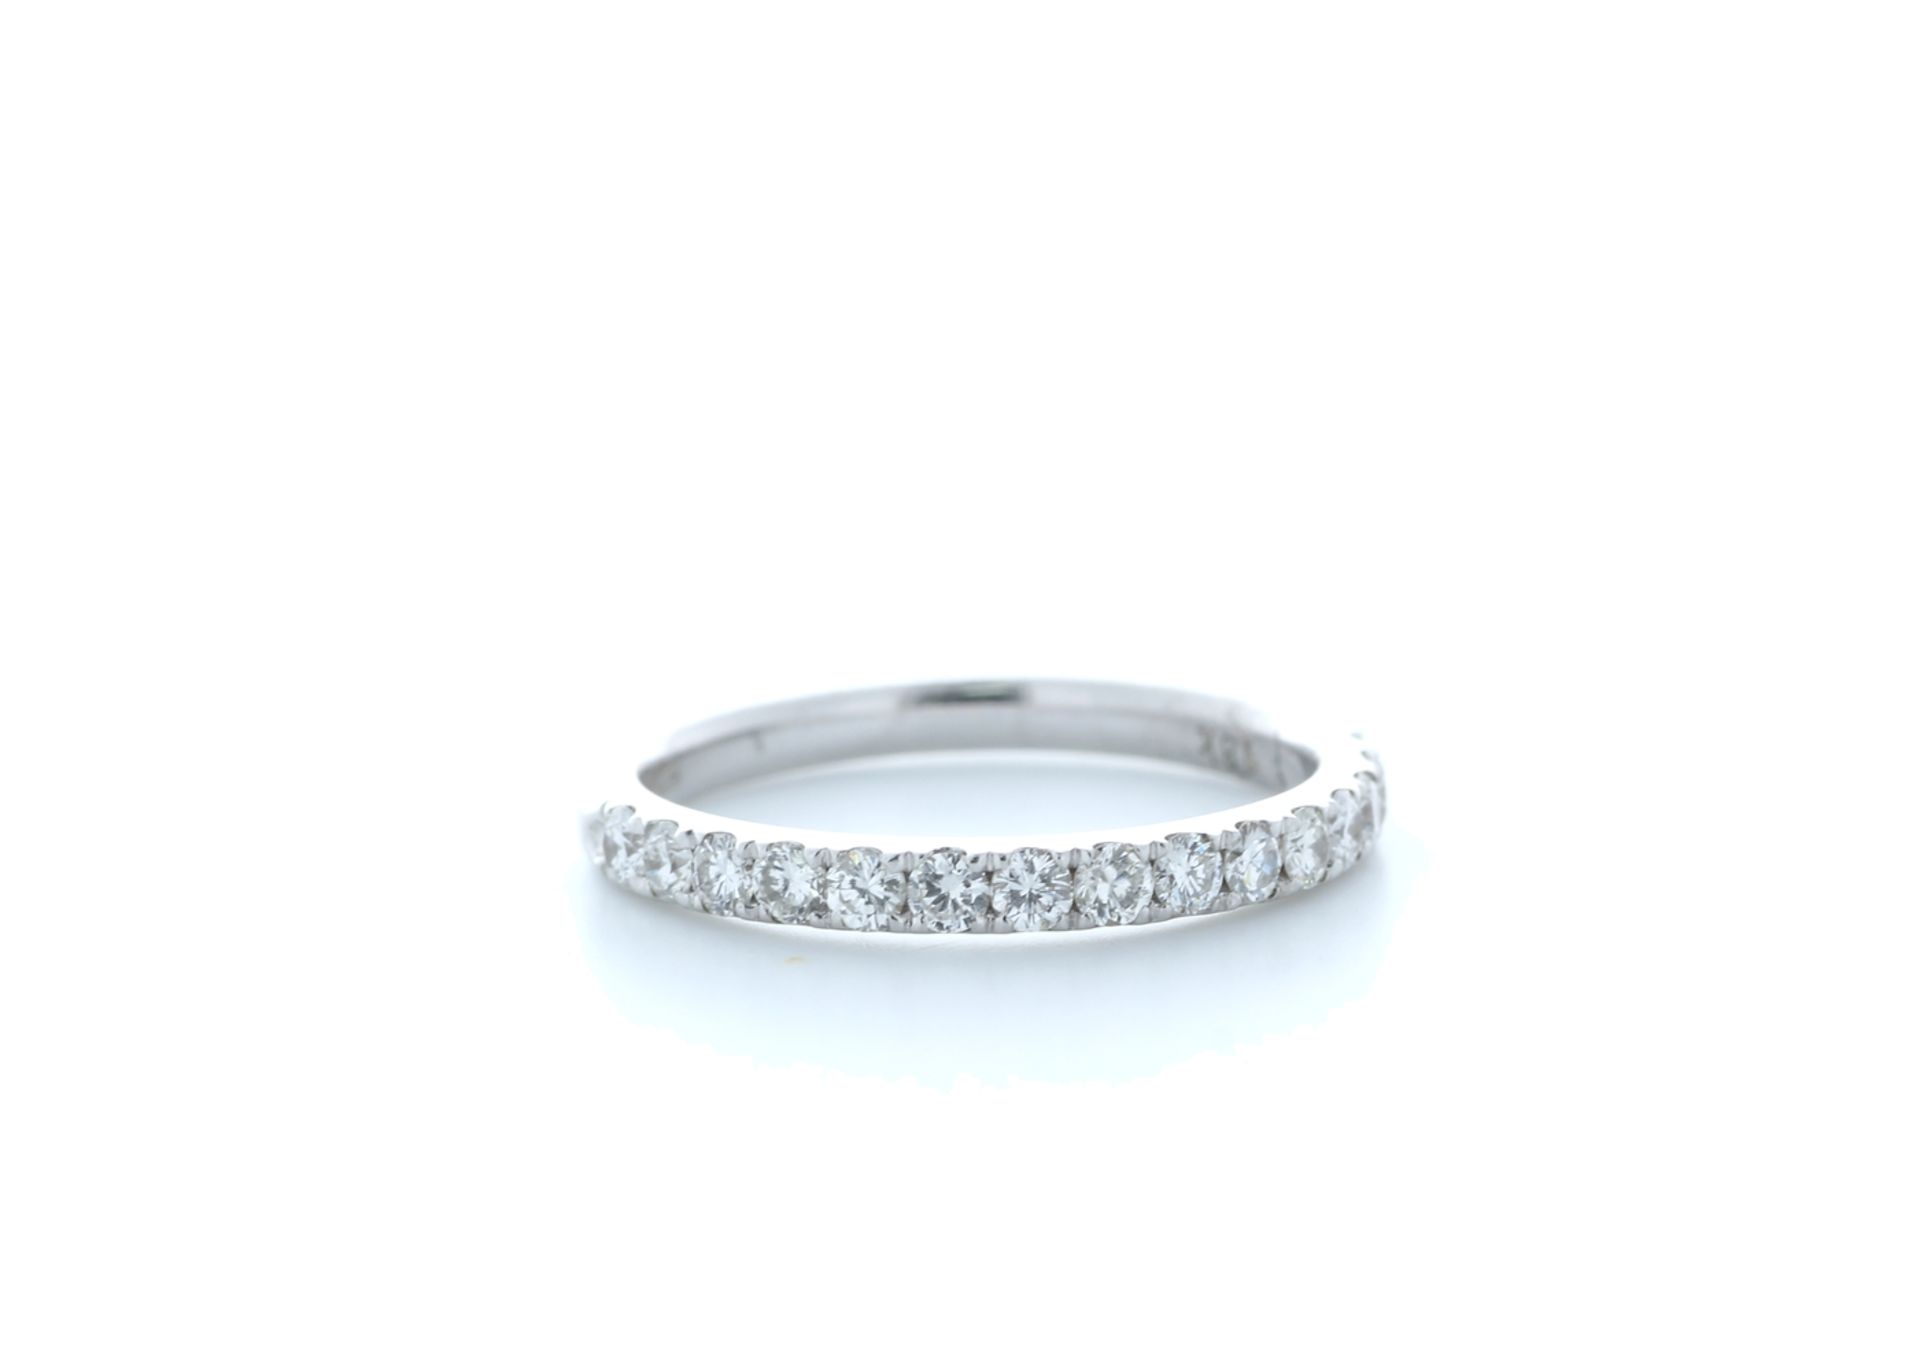 18ct White Gold Claw Set Semi Eternity Diamond Ring 0.44 Carats - Valued by IDI £3,250.00 - 18ct - Image 3 of 4